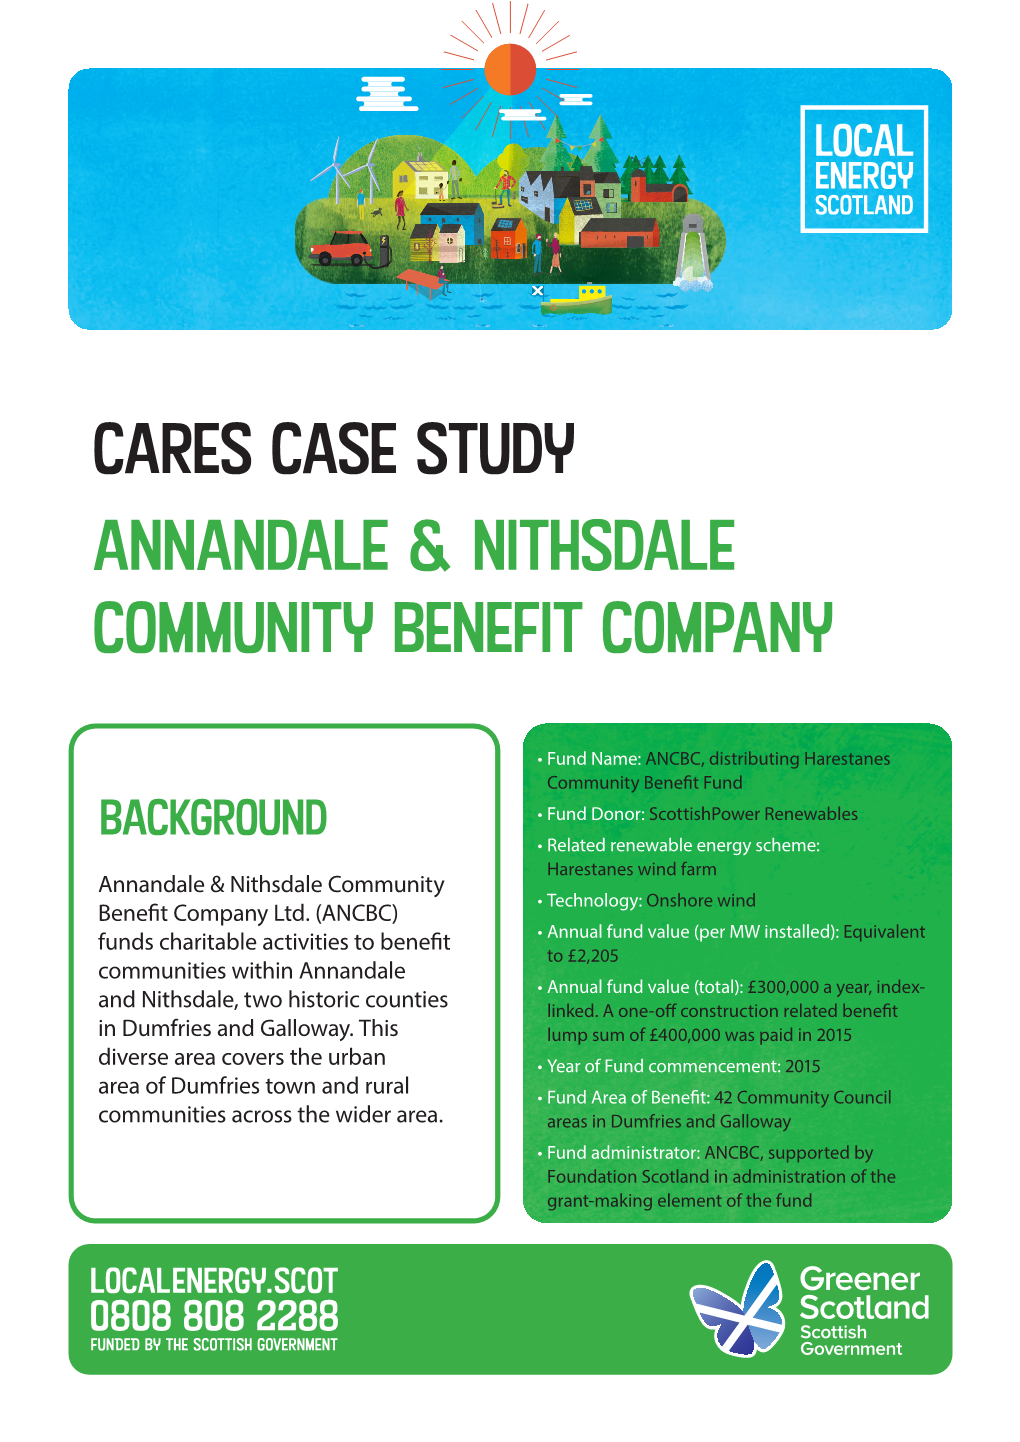 Cares Case Study Annandale & Nithsdale Community Benefit Company